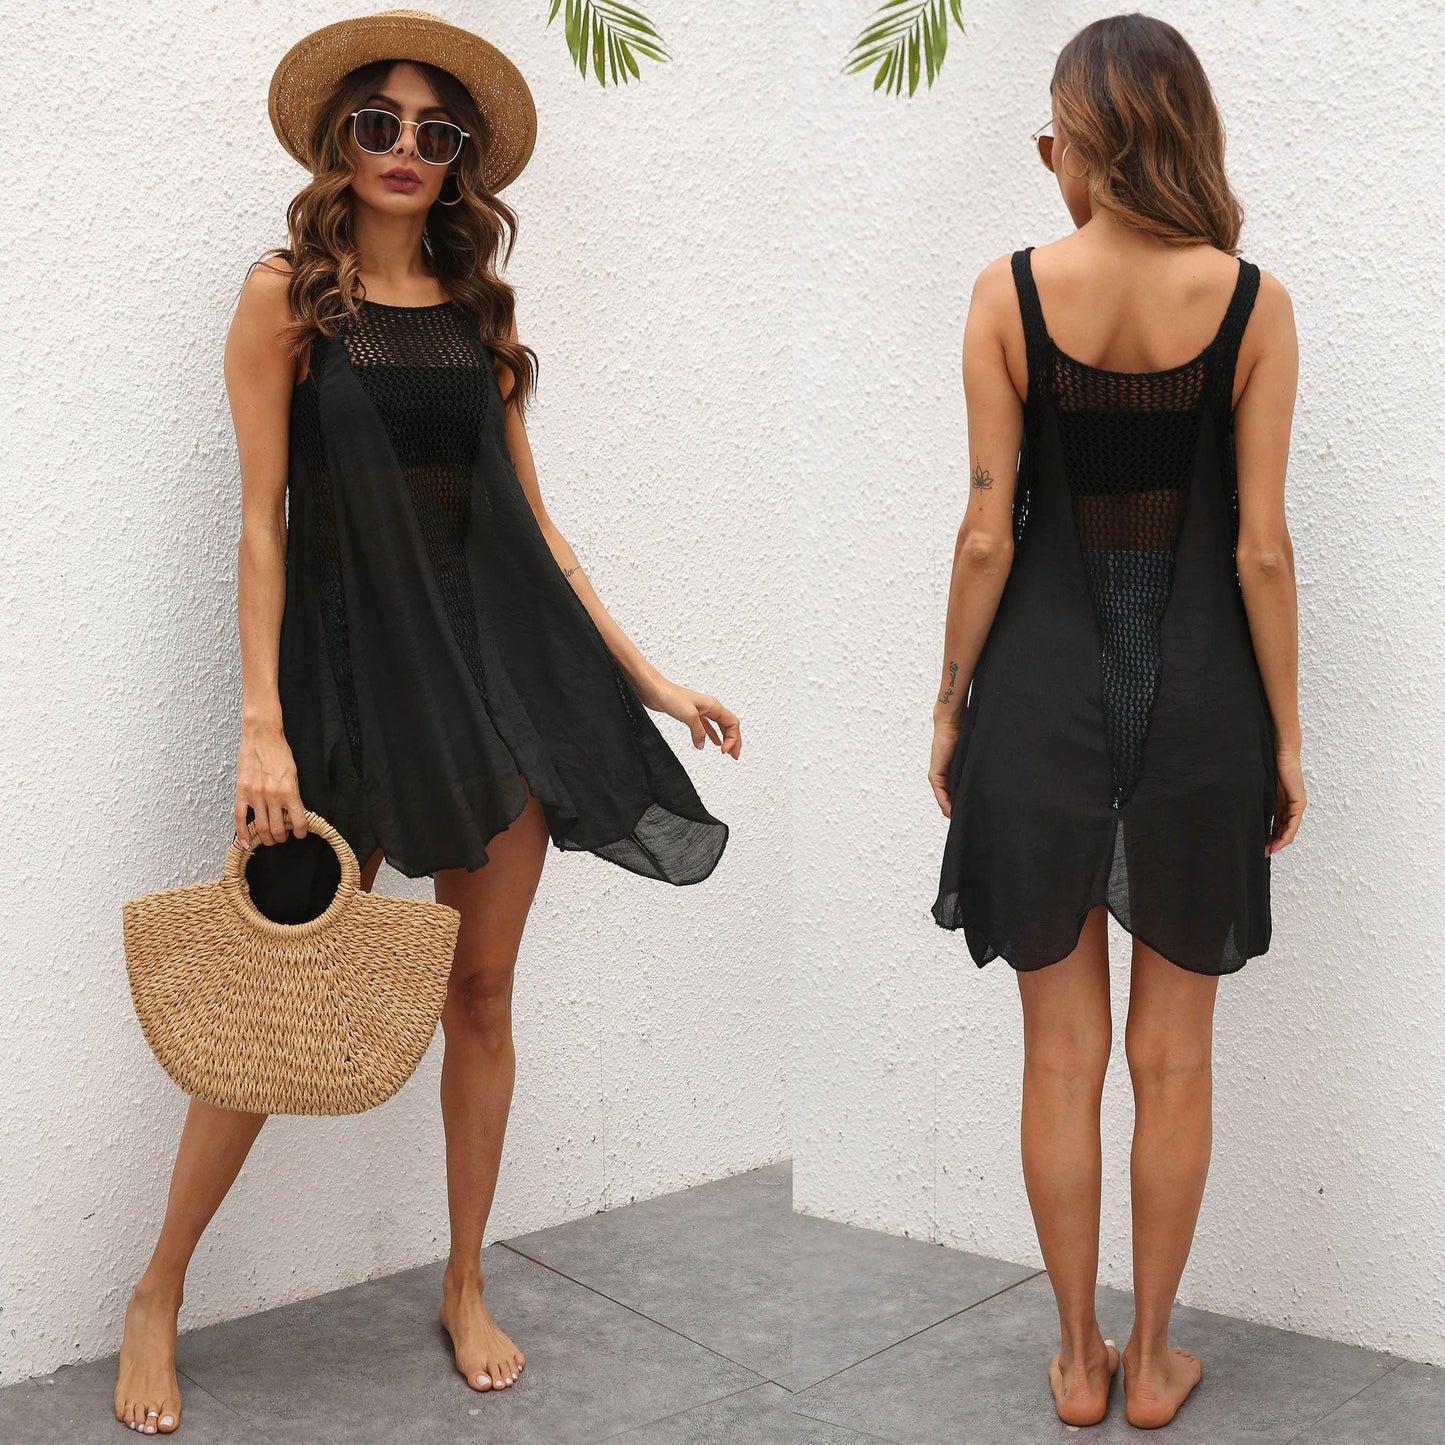 Women Irregular Summer Beach Cover Ups-Cozy Dresses-Free Shipping at meselling99